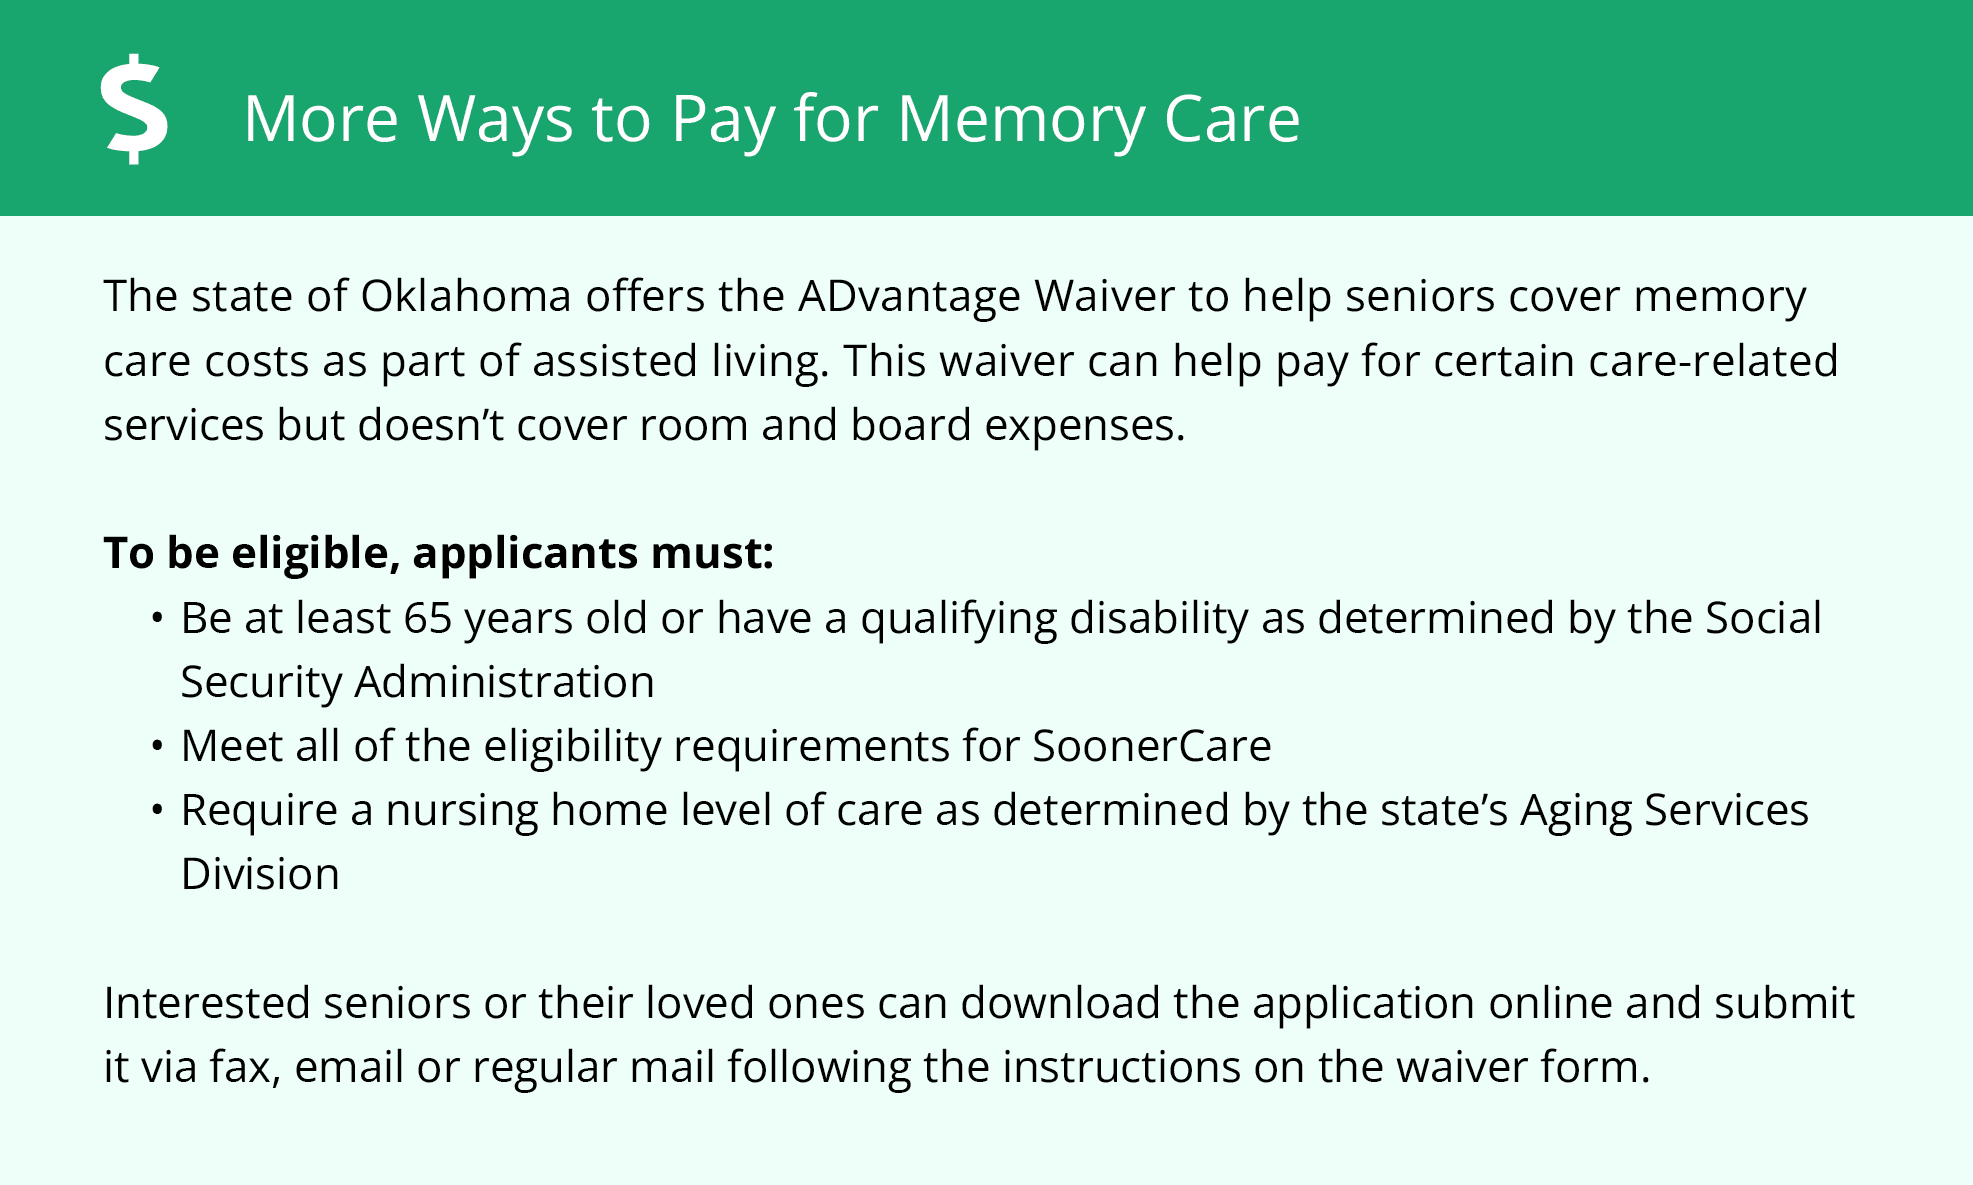 Financial Assistance for Memory Care in Oklahoma